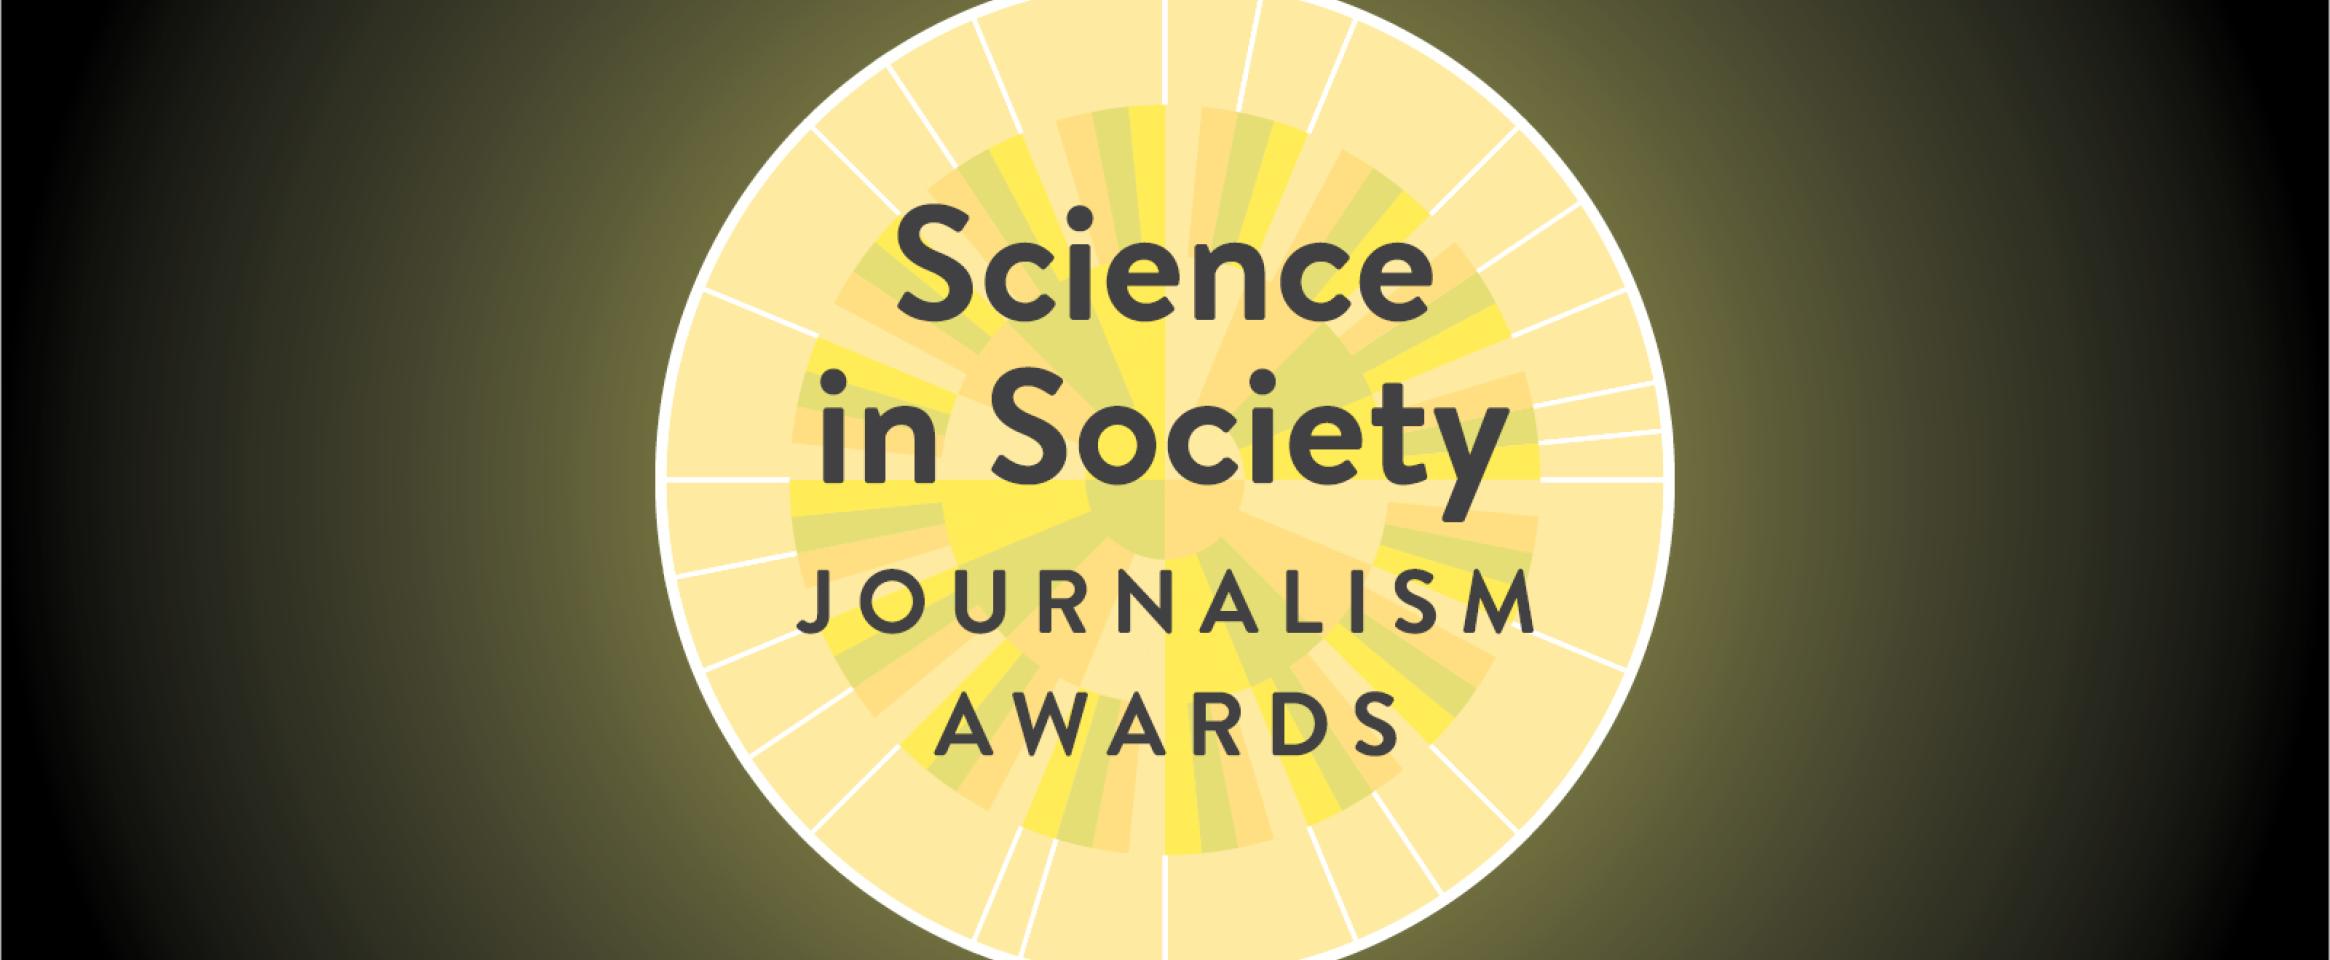 Graphic with circular logo of the N A S W Science in Society Journalism Awards, which somewhat resembles a rosette or a plasmid diagram. The logo is set against a radiating gradient pattern, evoking the sense of knowledge spreading across a barren space.